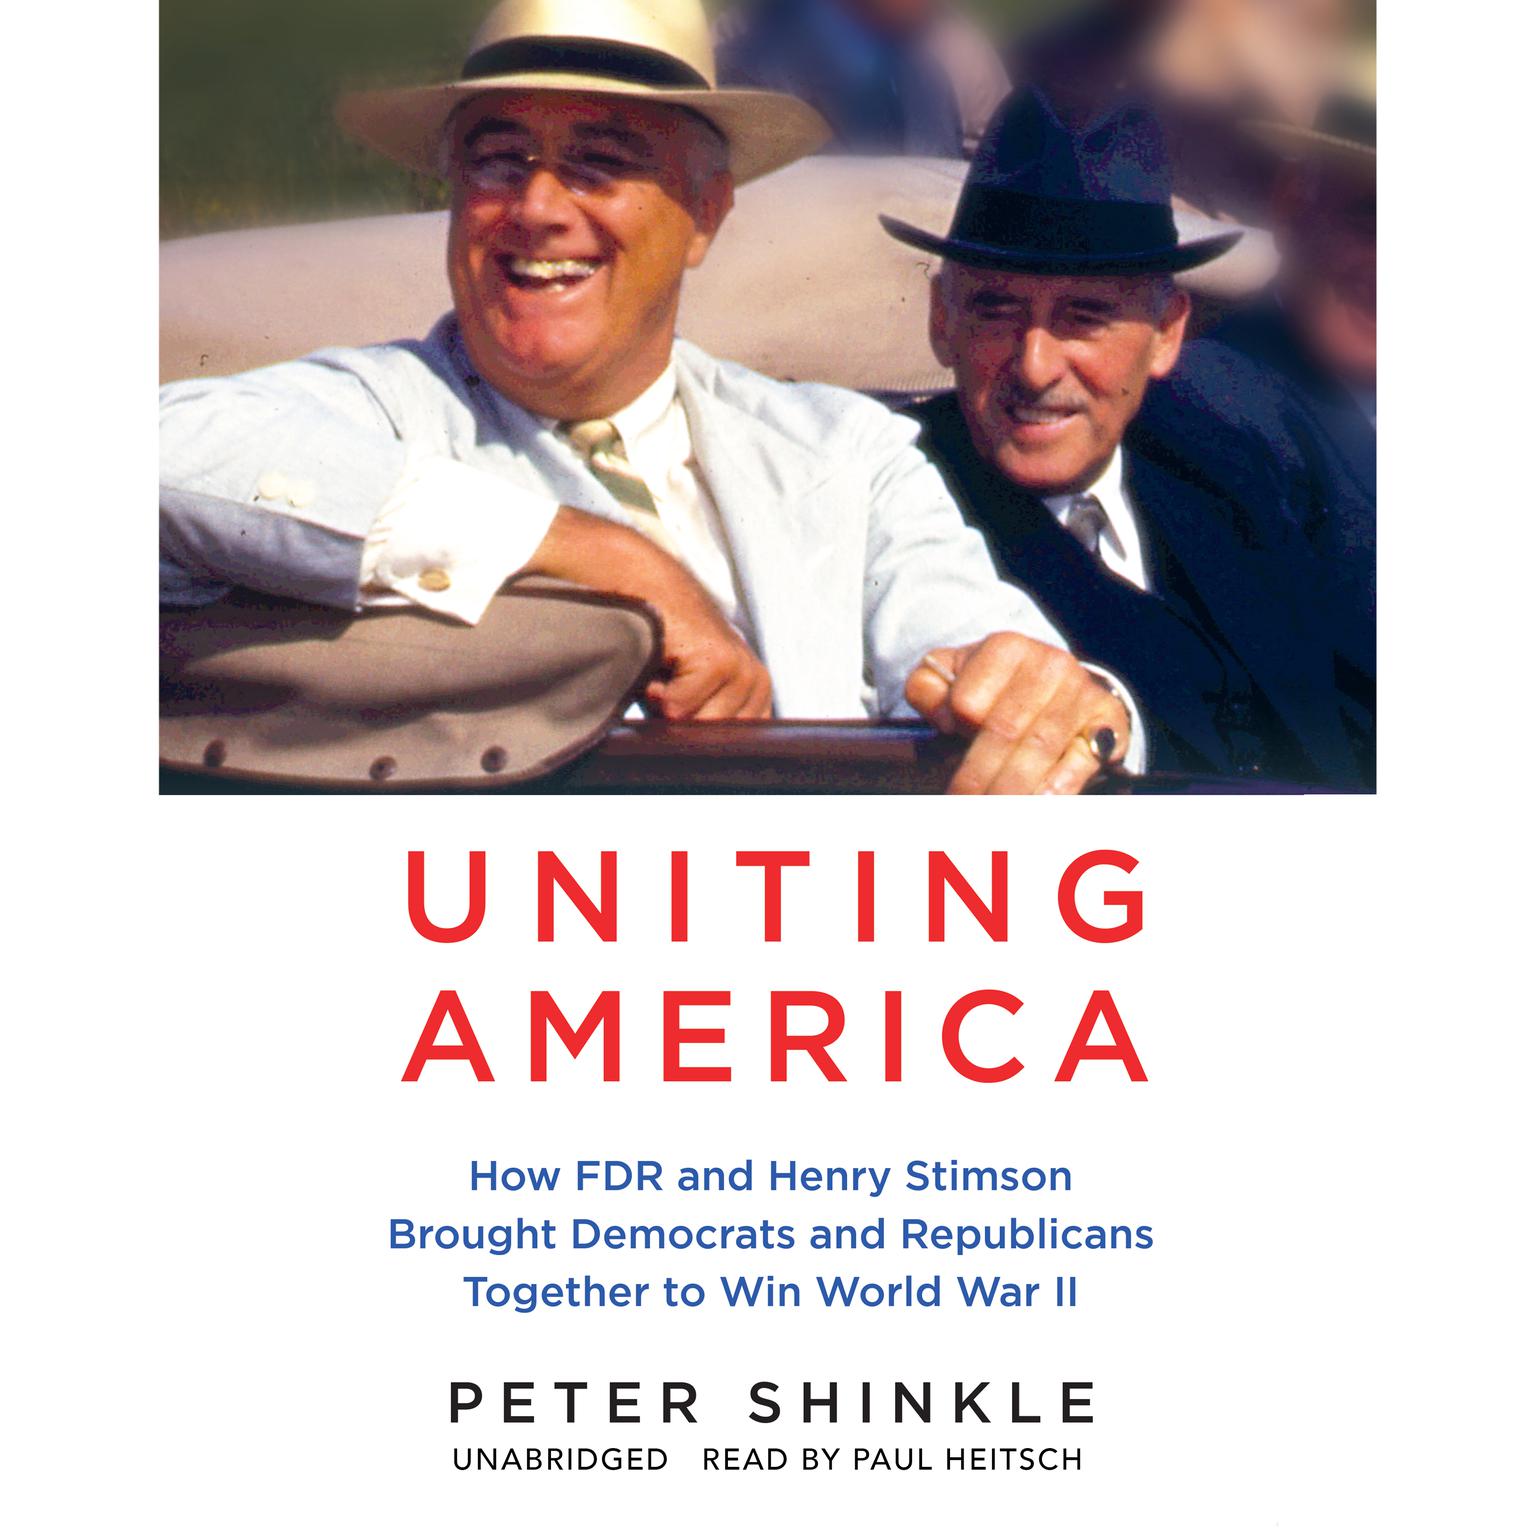 Uniting America: How FDR and Henry Stimson Brought Democrats and Republicans Together to Win World War II Audiobook, by Peter Shinkle